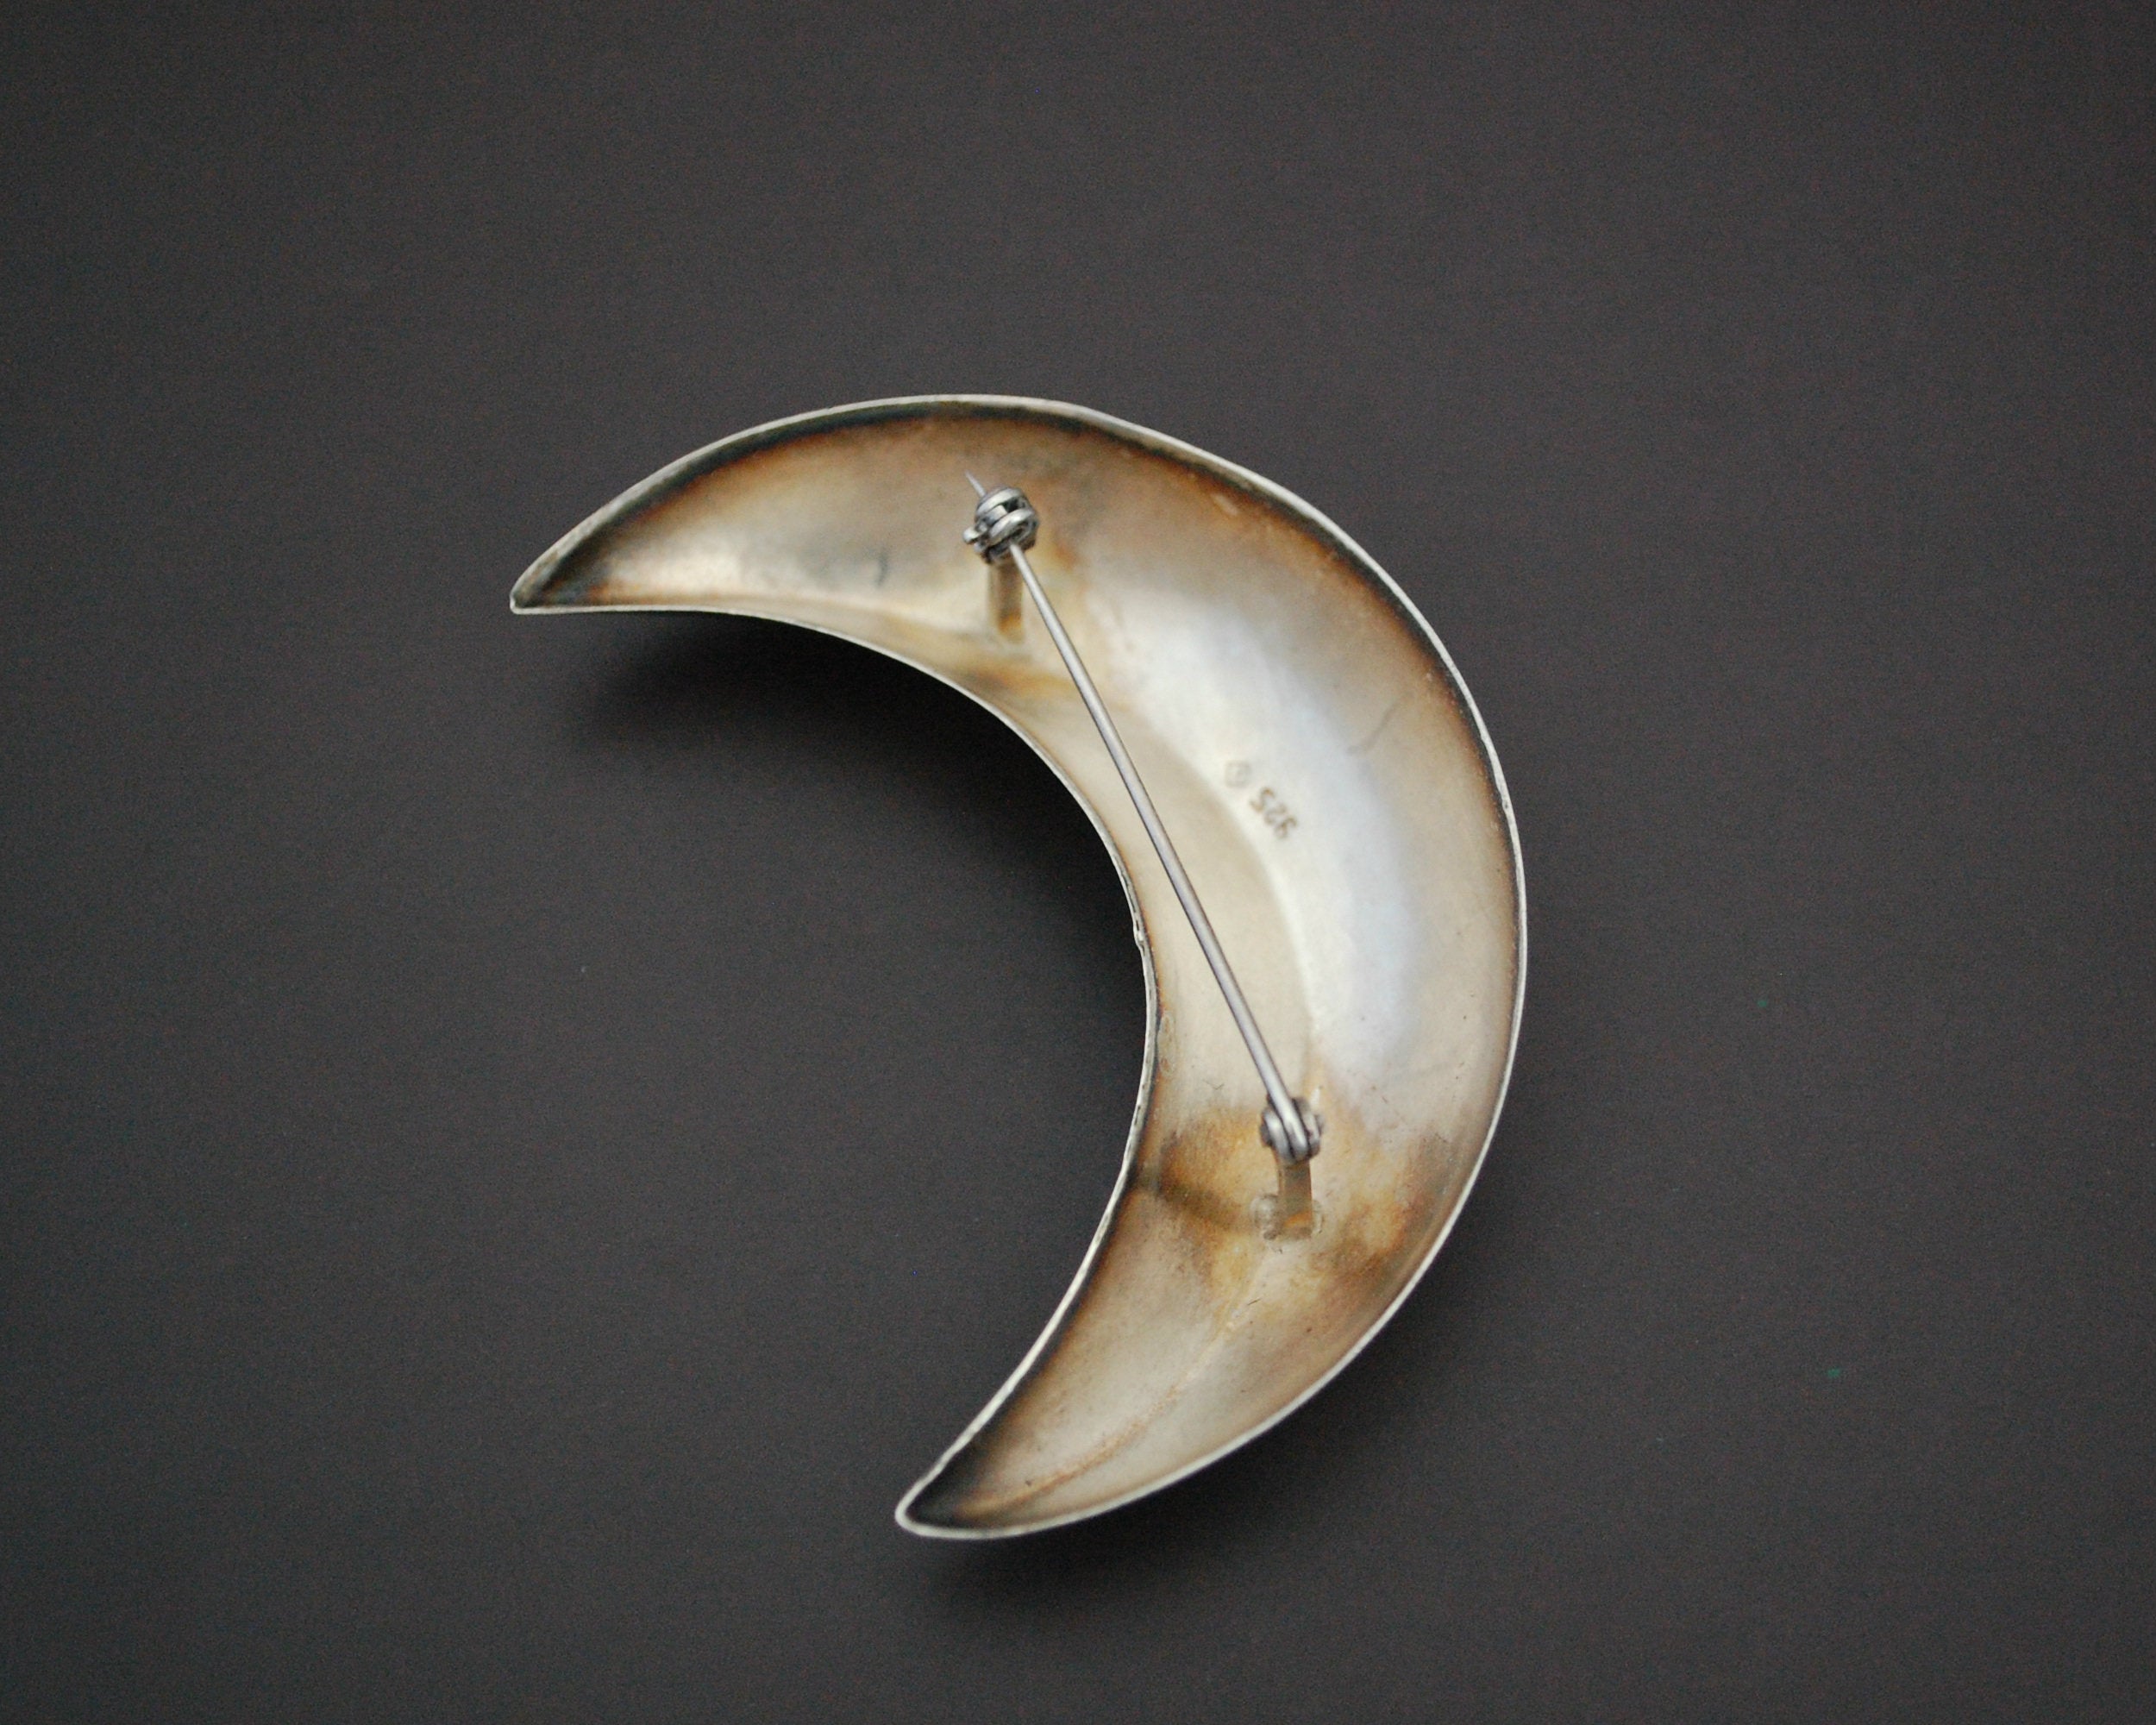 Large Sterling Silver Crescent Moon Brooch